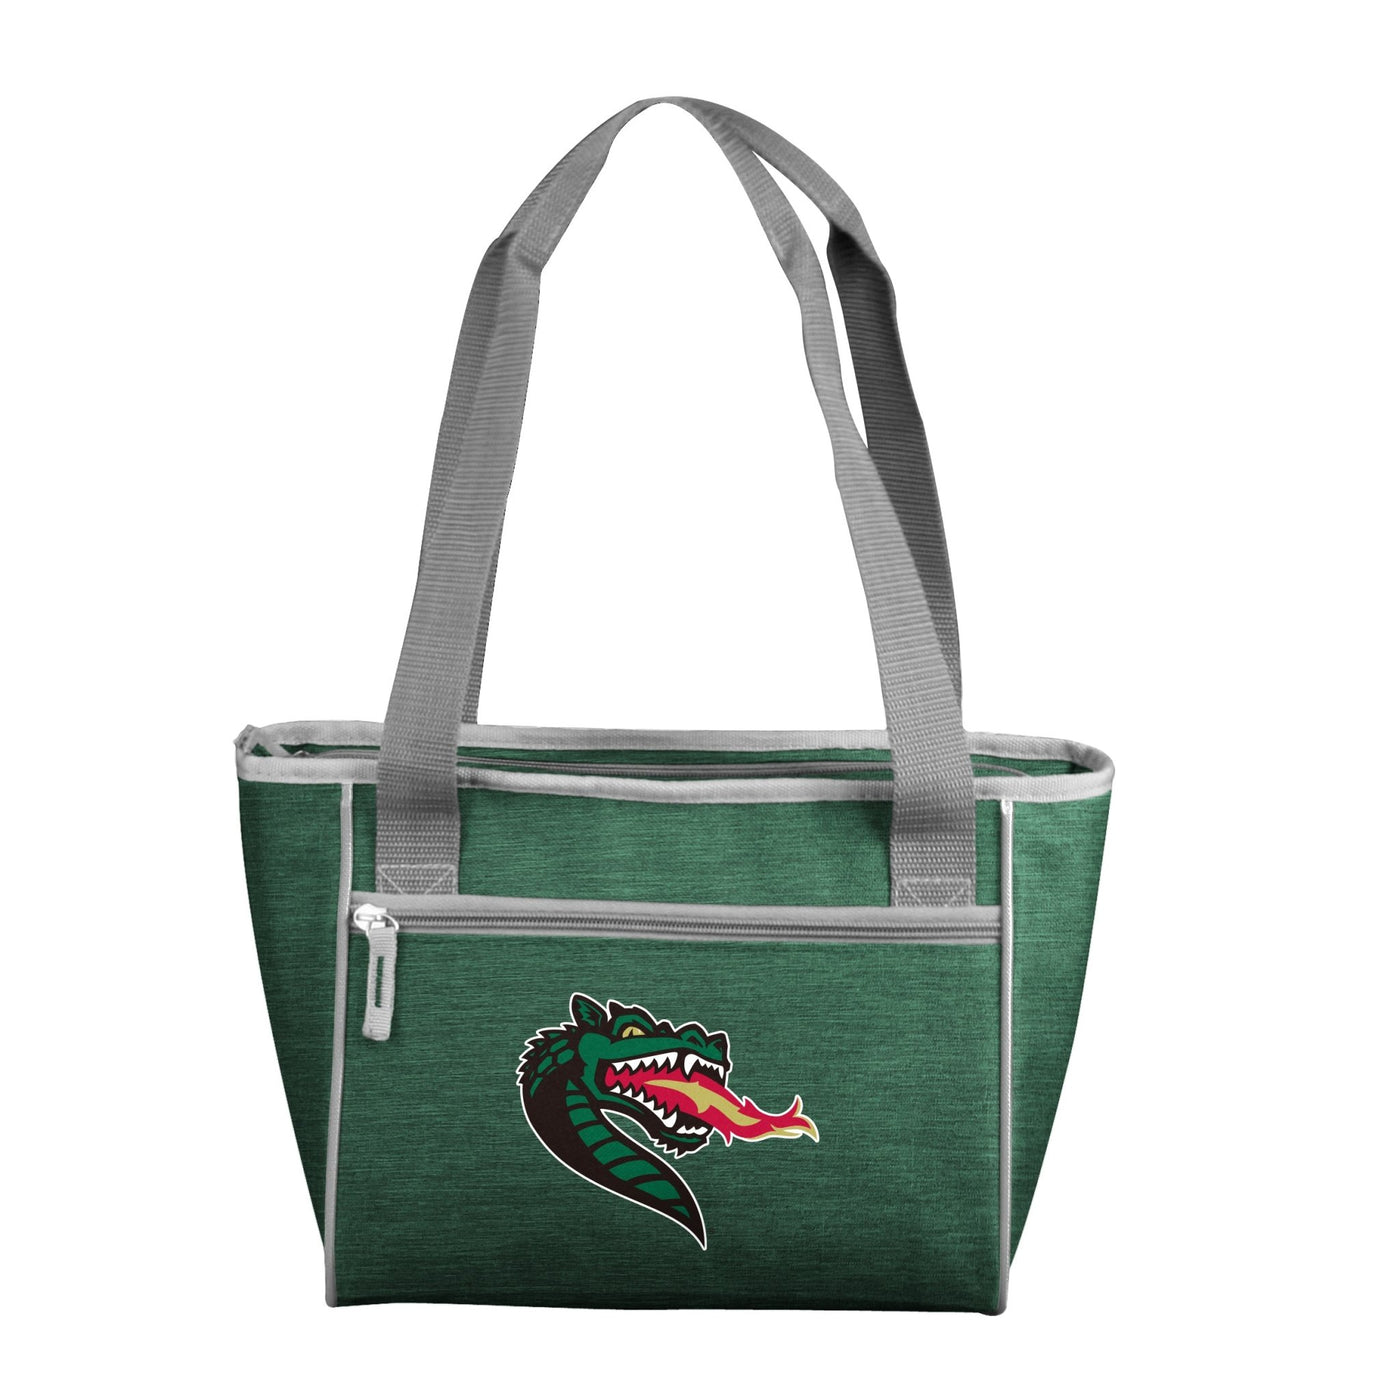 UAB Crosshatch 16 Can Cooler Tote - Logo Brands